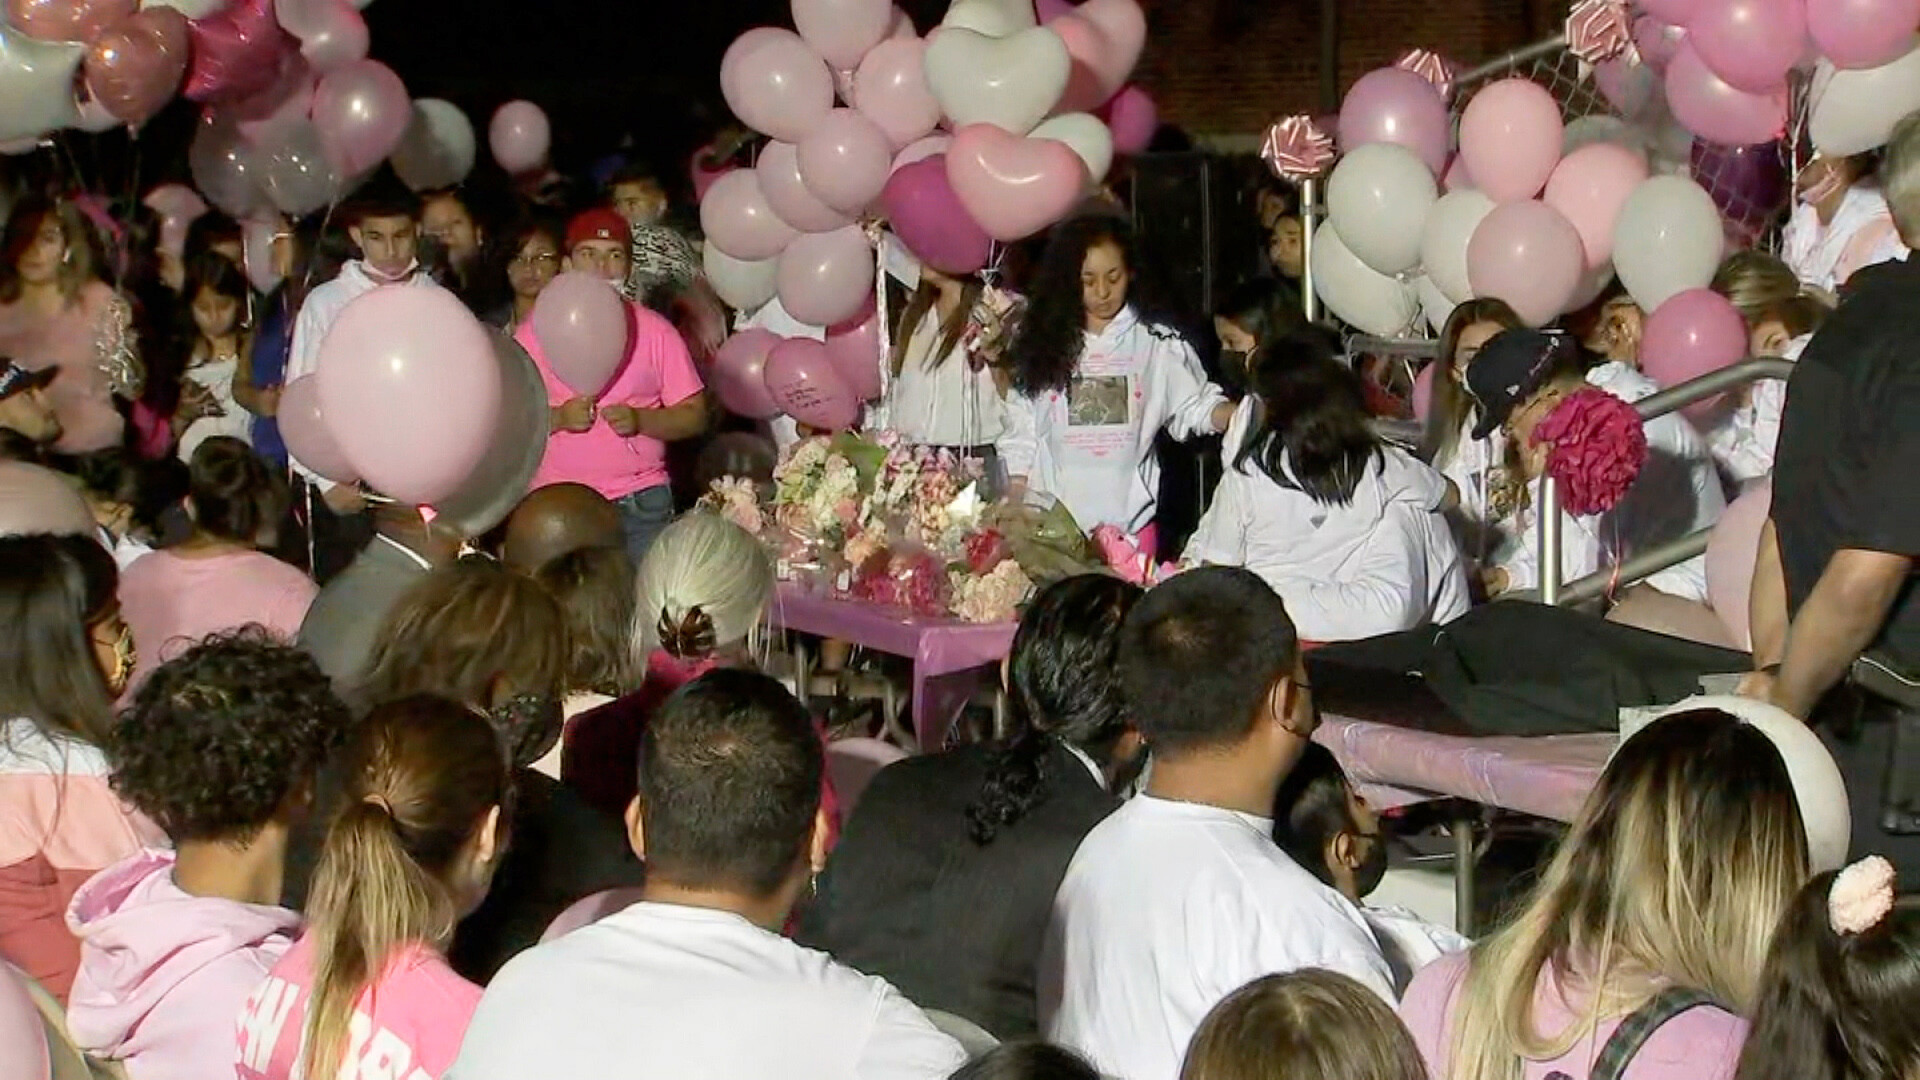 A vigil is held to honor Brianna Rodriguez. Rodriguez is one of the nine people who died at Travis Scott's music festival when people got crushed